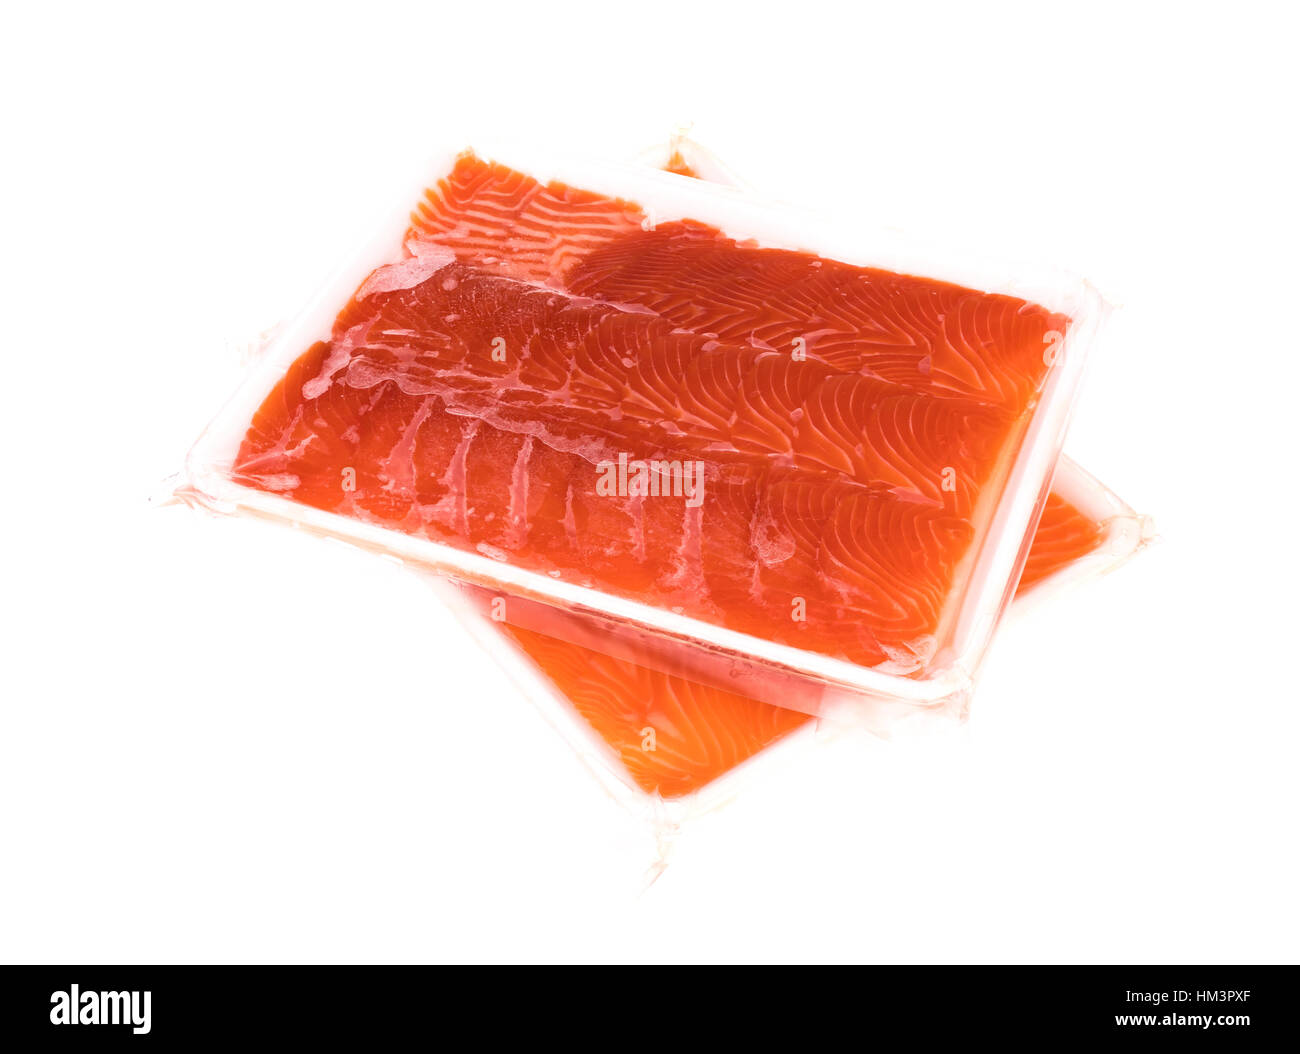 Frozen seafood package Cut Out Stock Images & Pictures - Alamy